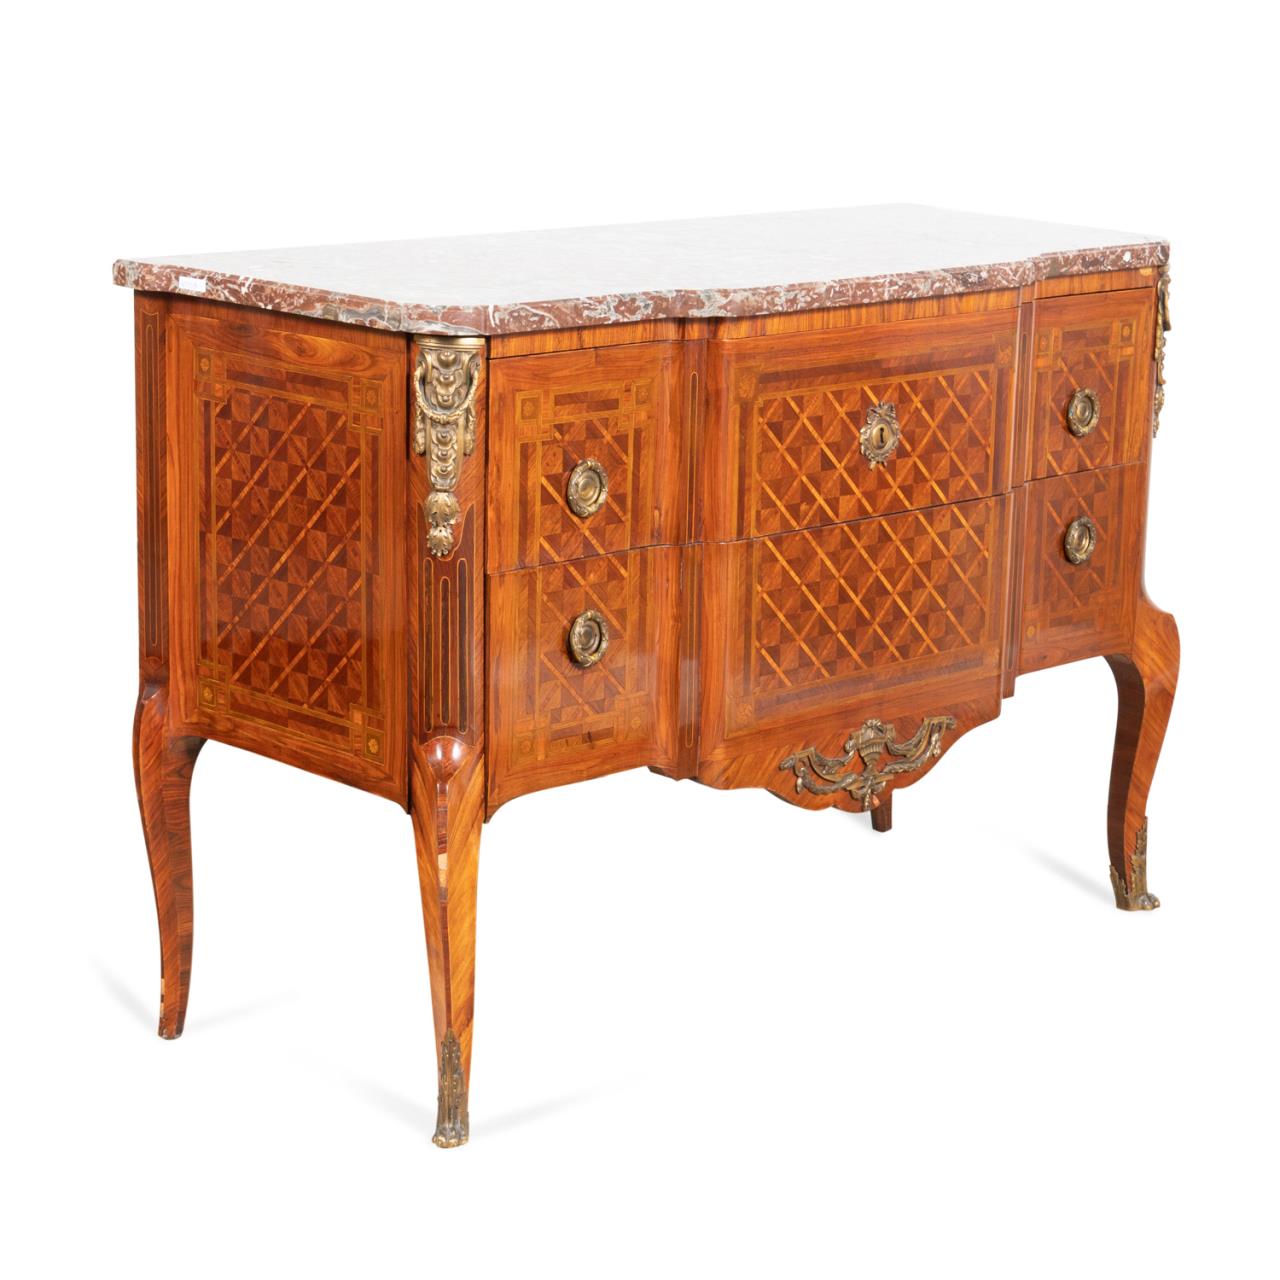 LOUIS XV TRANSITIONAL STYLE PARQUETRY 2bfd70